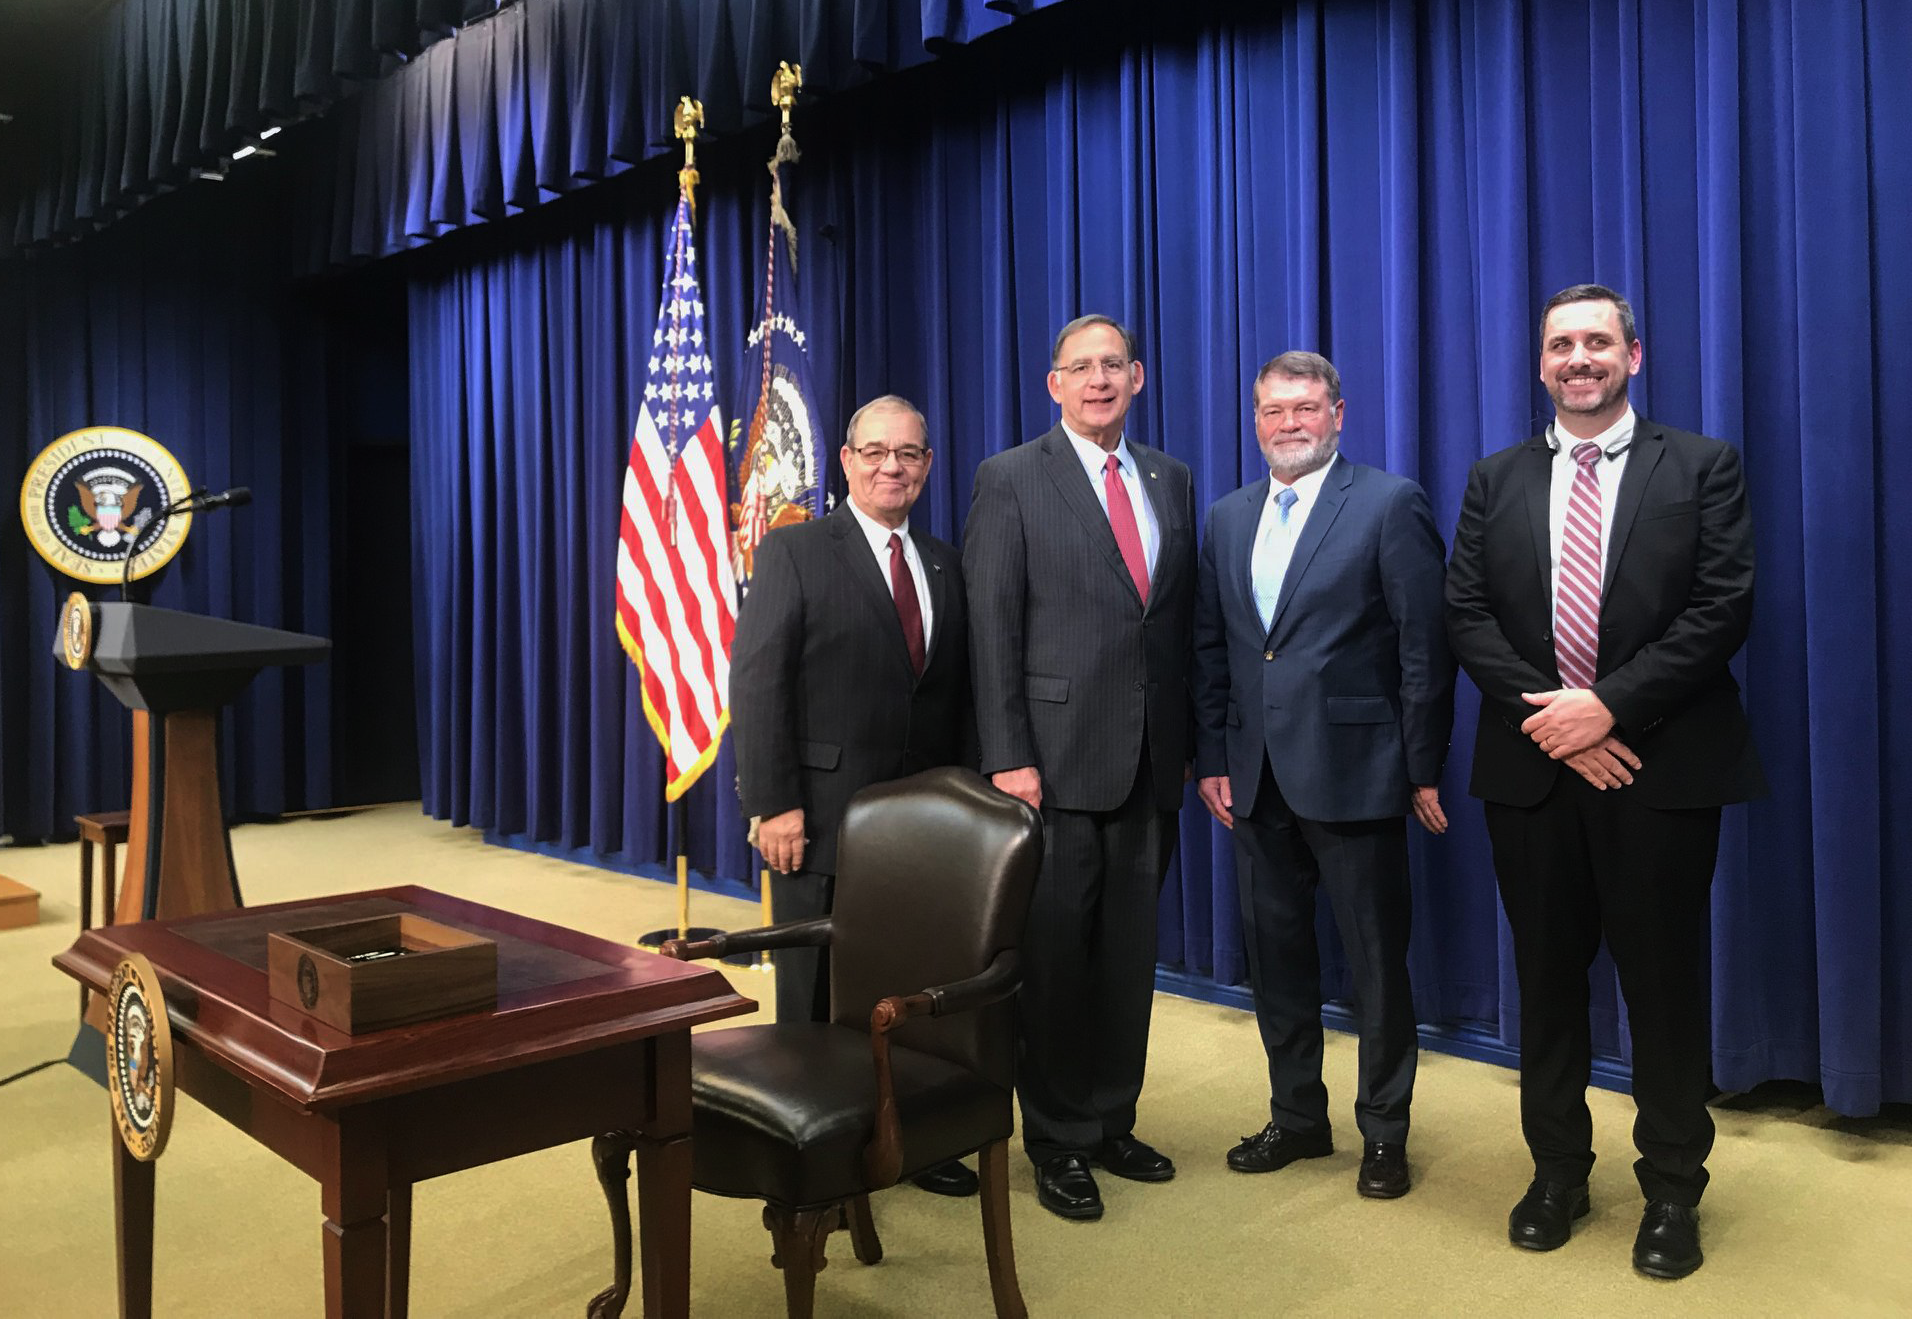 Senator Boozman, along with Arkansas Farm Bureau representatives President Randy Veach, Board Member Terry Dabbs and Director of Government Affairs Matt King, attended the 2018 Farm Bill signing ceremony at the White House